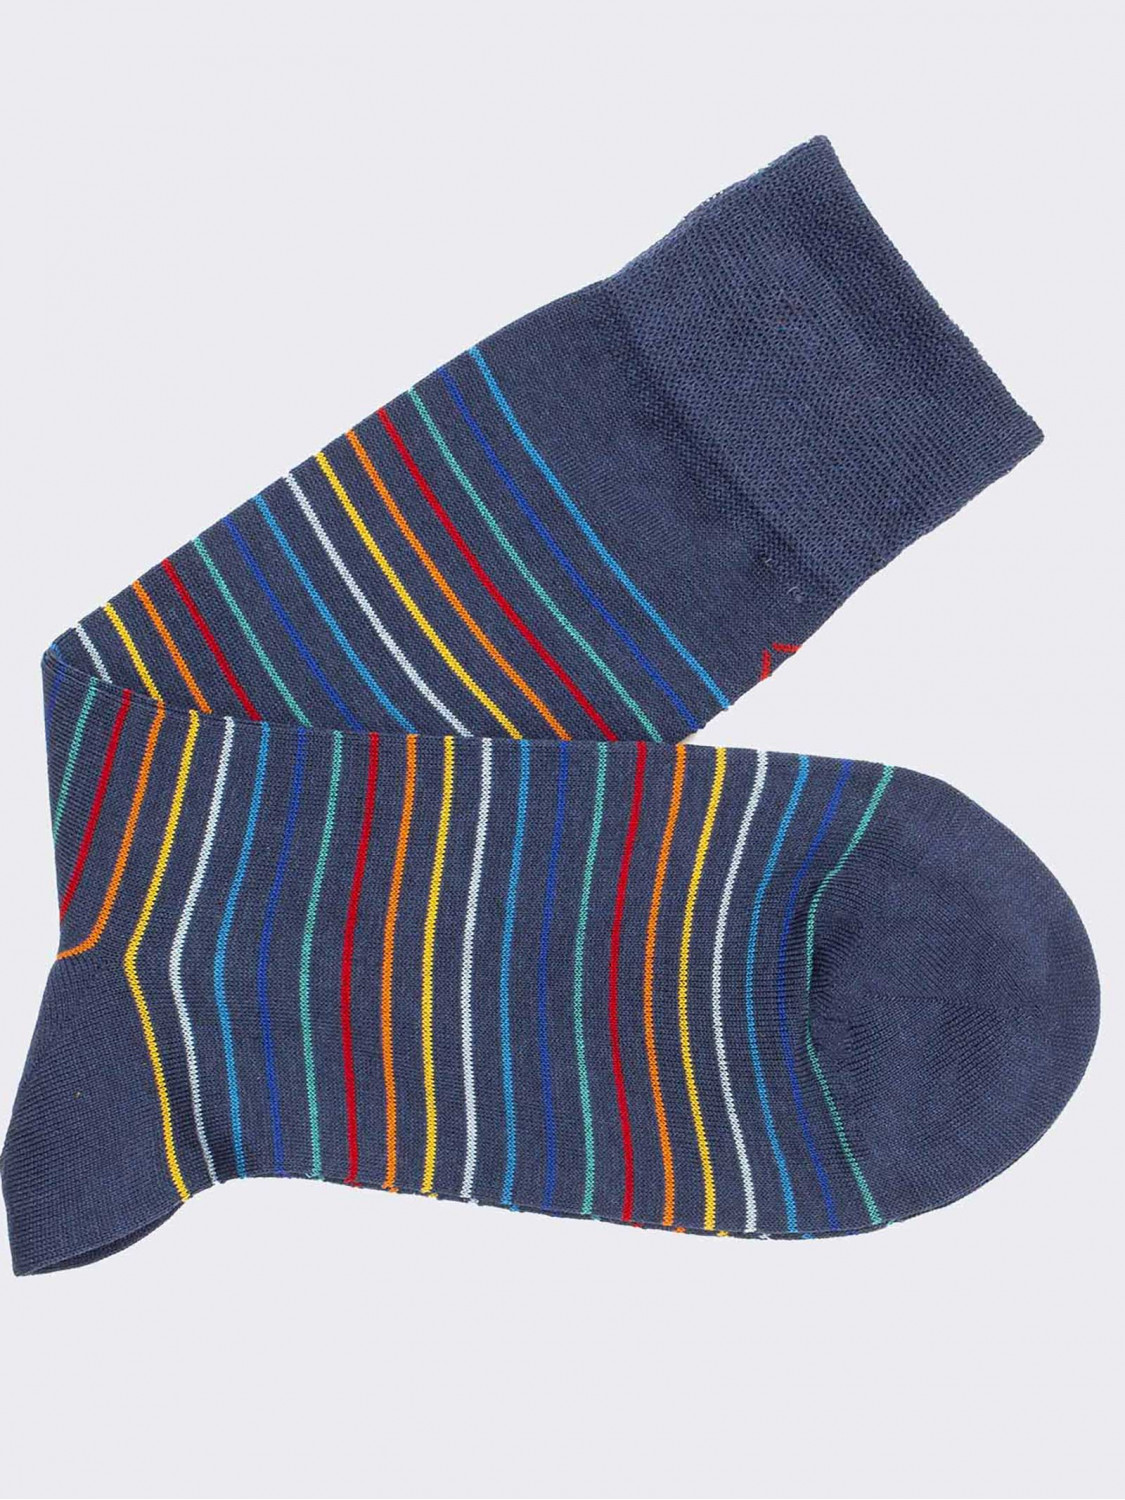 Men's crew striped patterned socks in cool Cotton